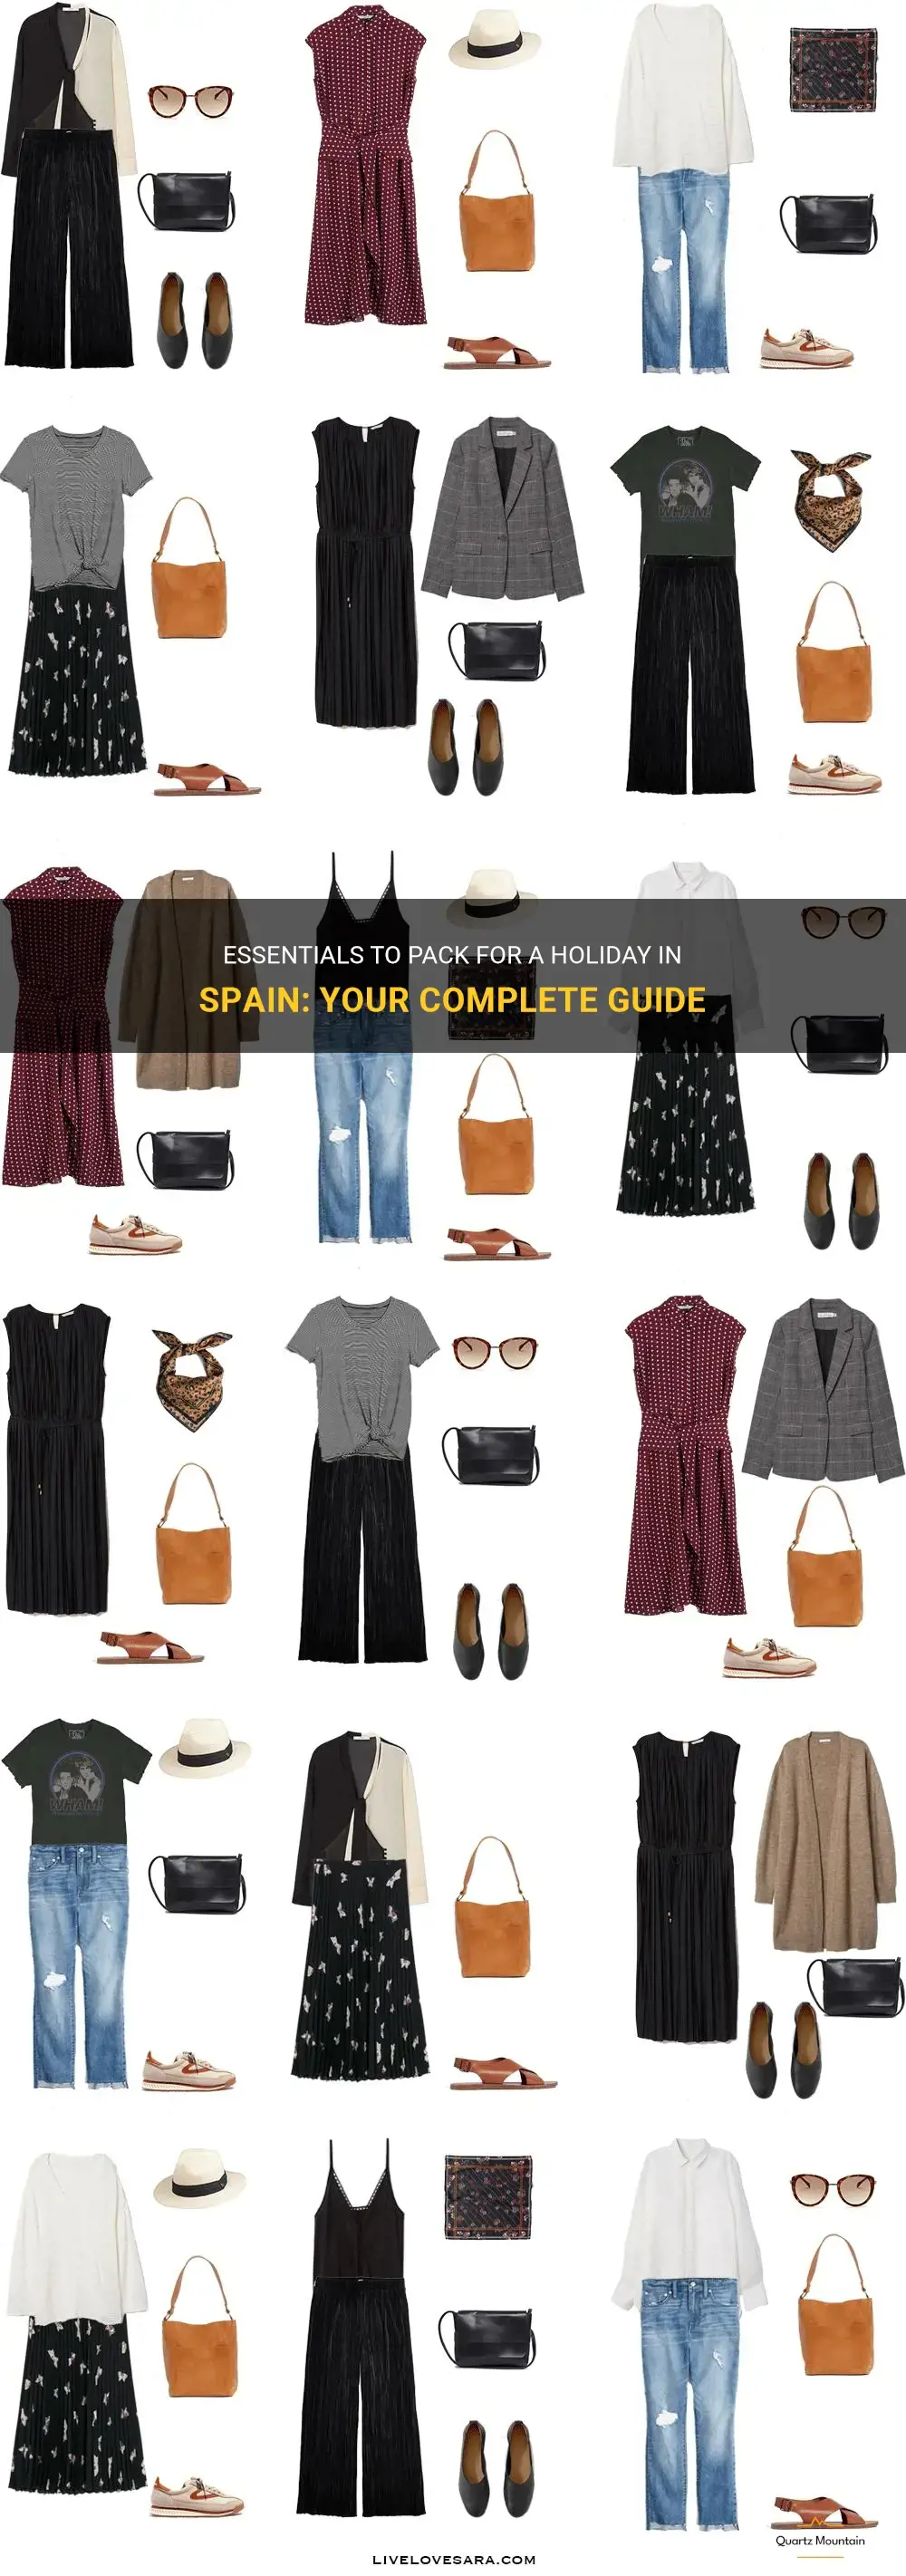 what to pack for a holiday to spain